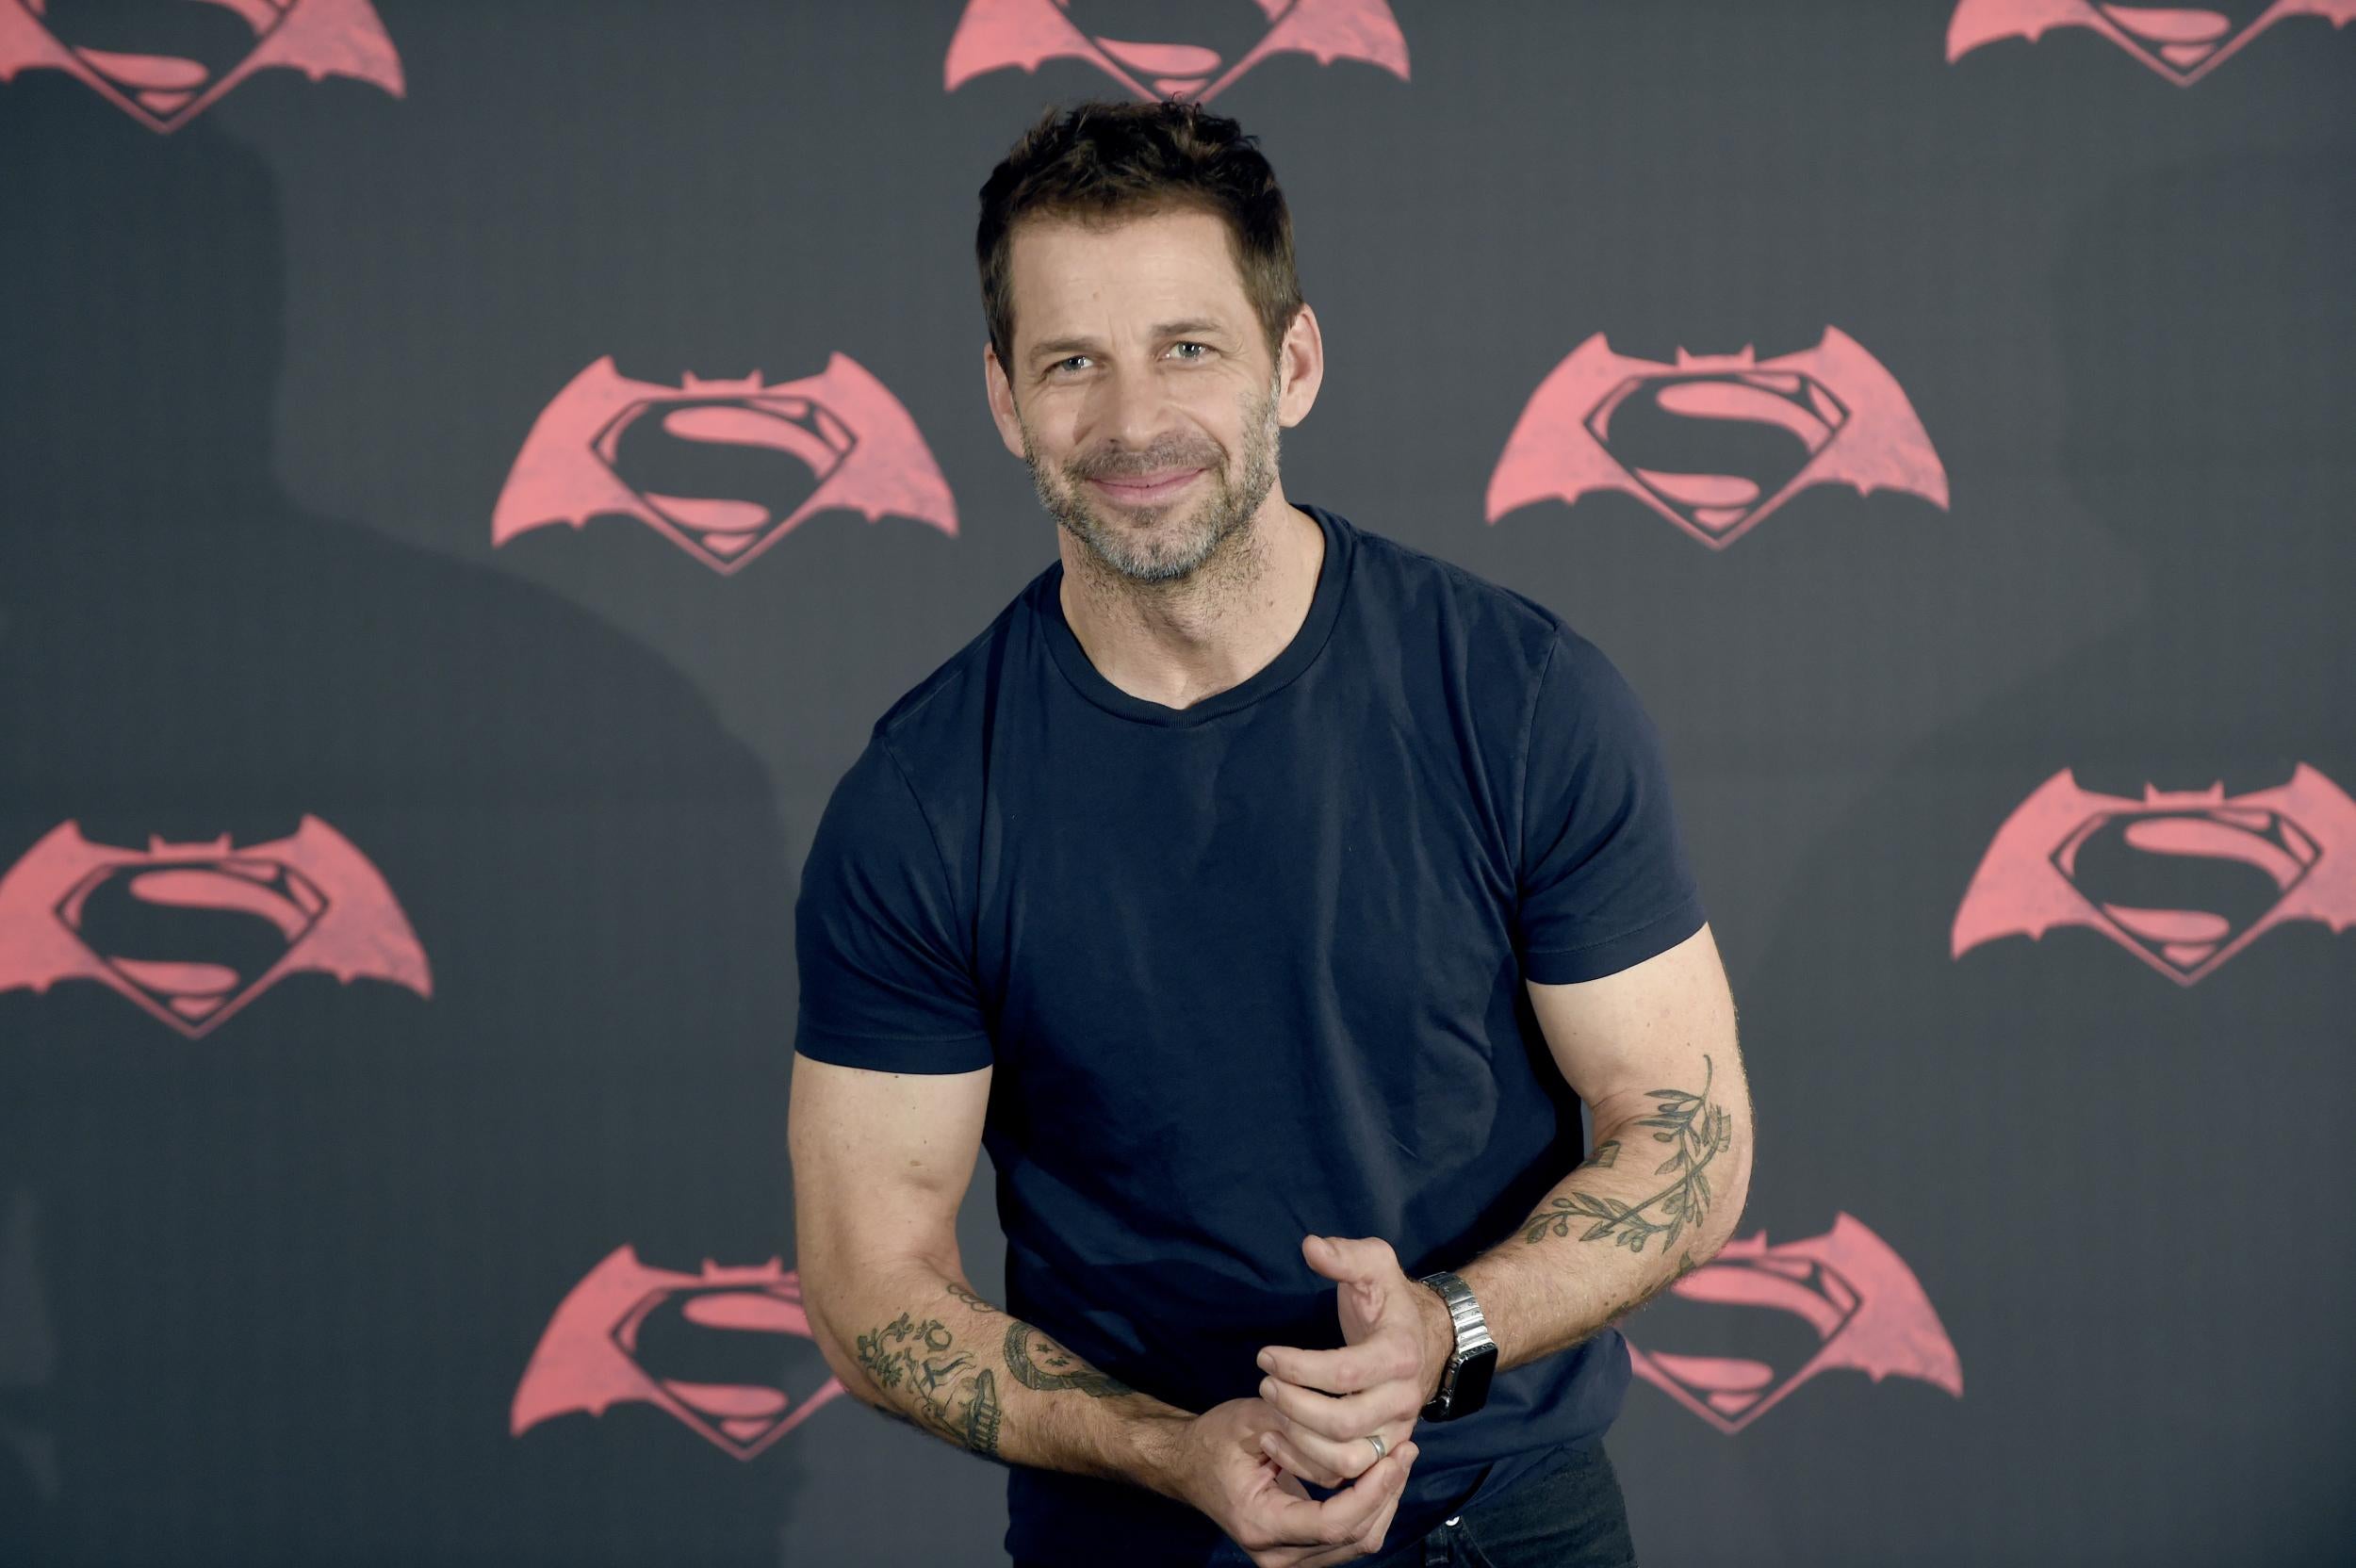 A Look Into Zack Snyder's Net Worth & Career